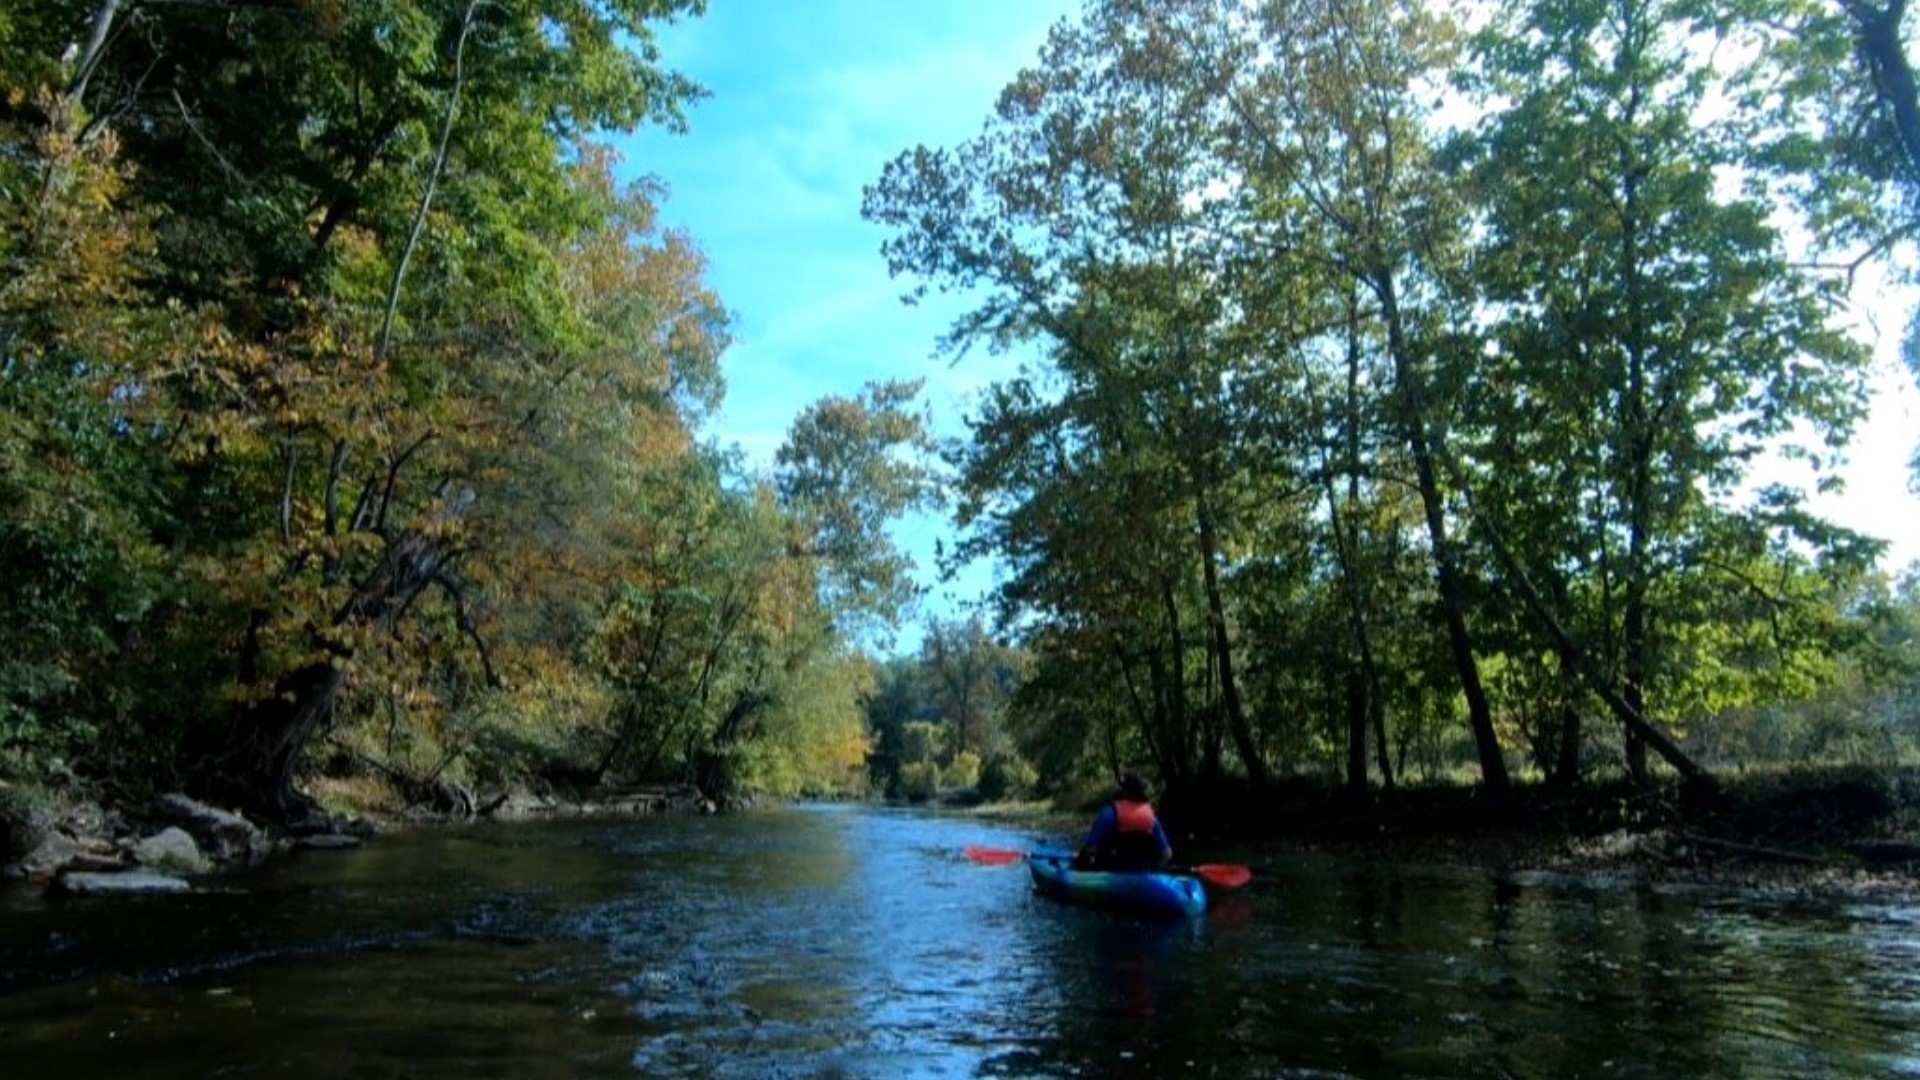 A tour in Cumberland County is forcing you to slow down, and enjoy the natural beauty as you float down the Yellow Breeches Creek.